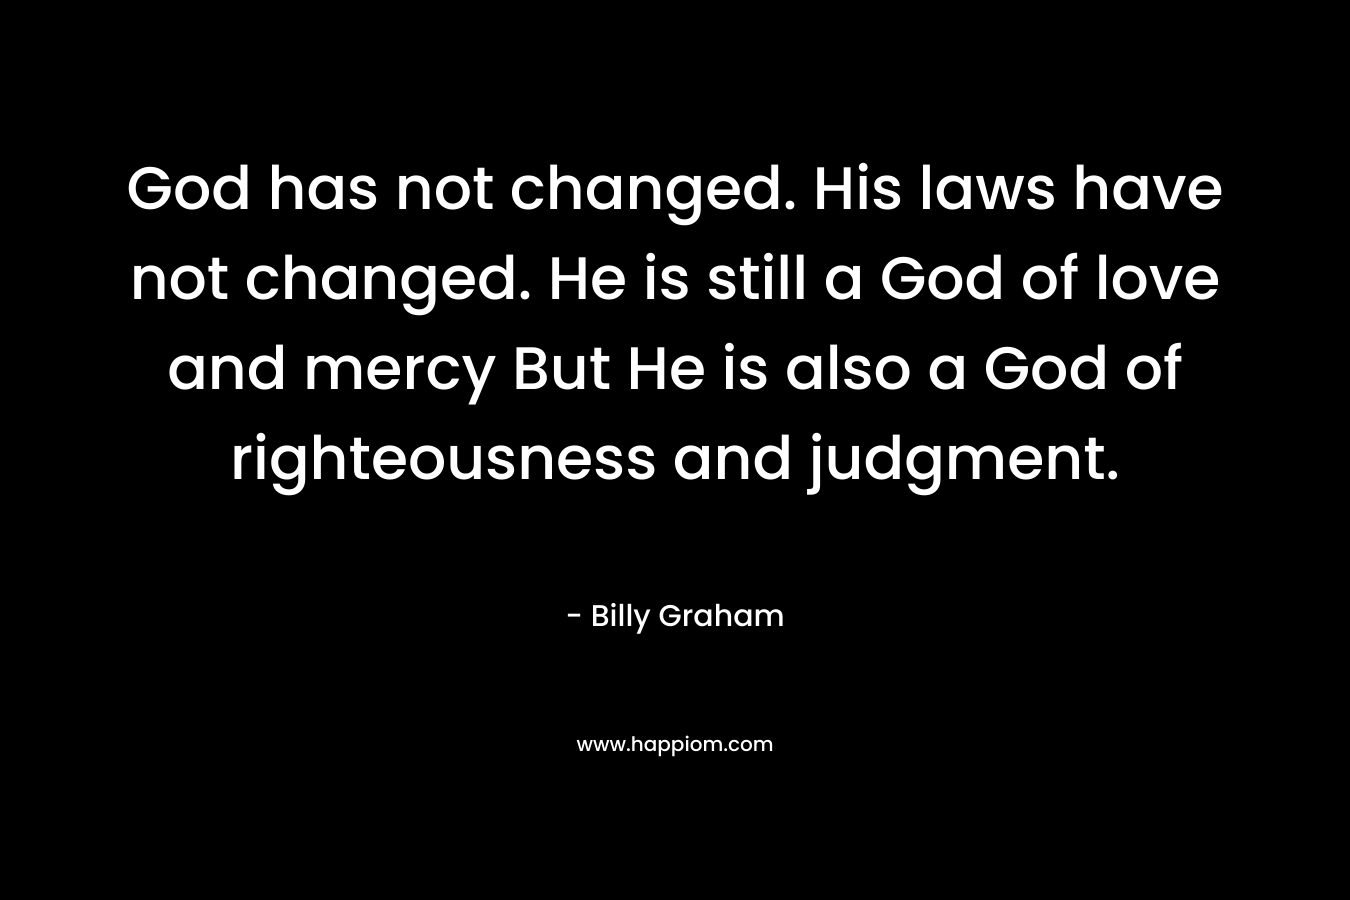 God has not changed. His laws have not changed. He is still a God of love and mercy But He is also a God of righteousness and judgment.